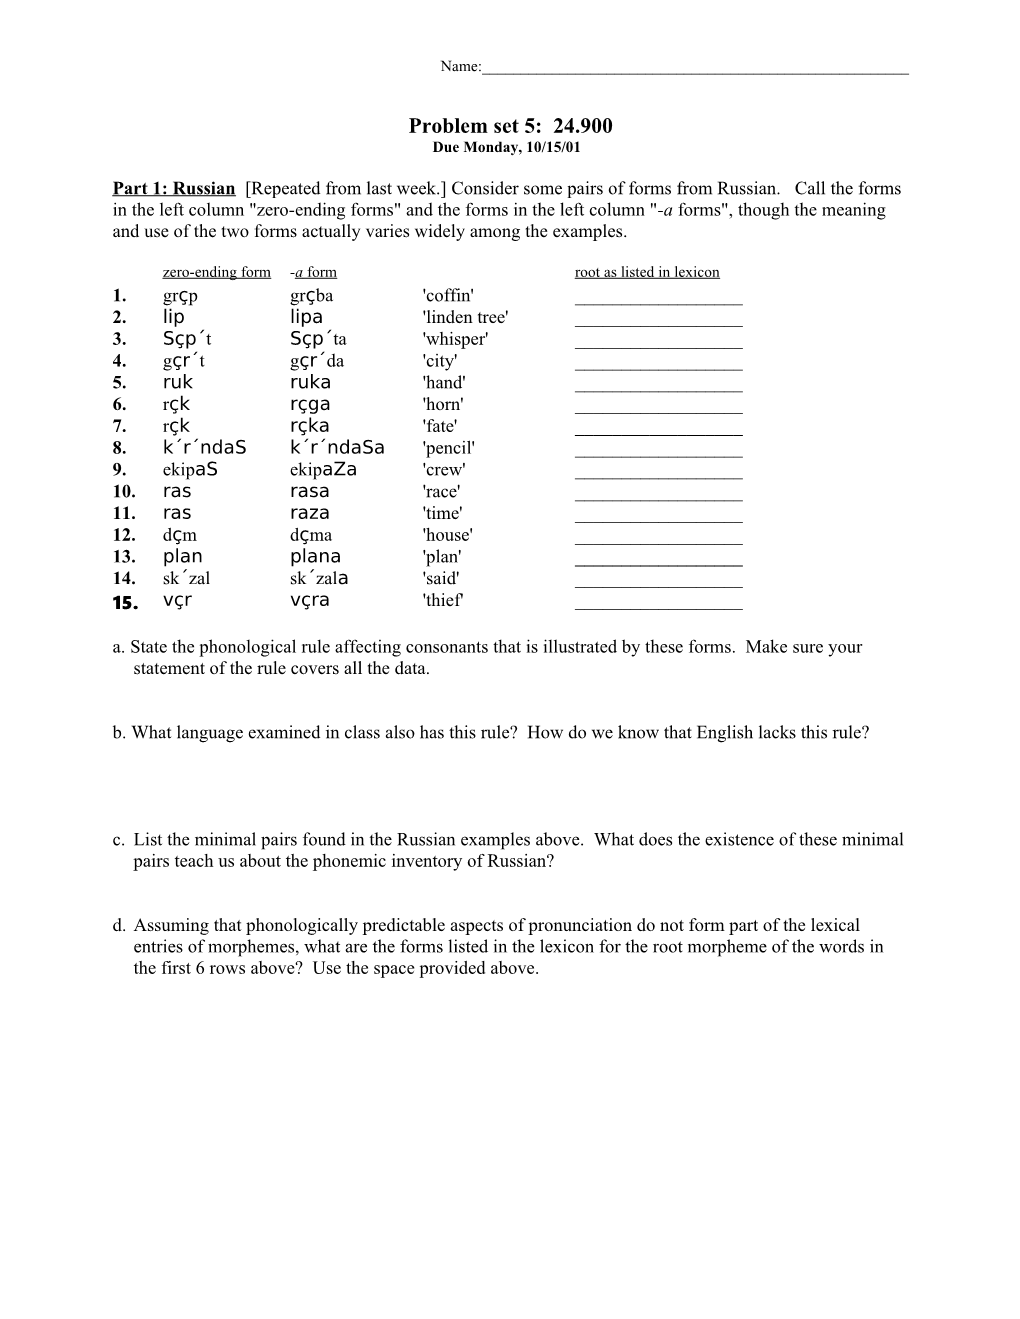 Part 1: Russian Repeated from Last Week. Consider Some Pairs of Forms from Russian. Call